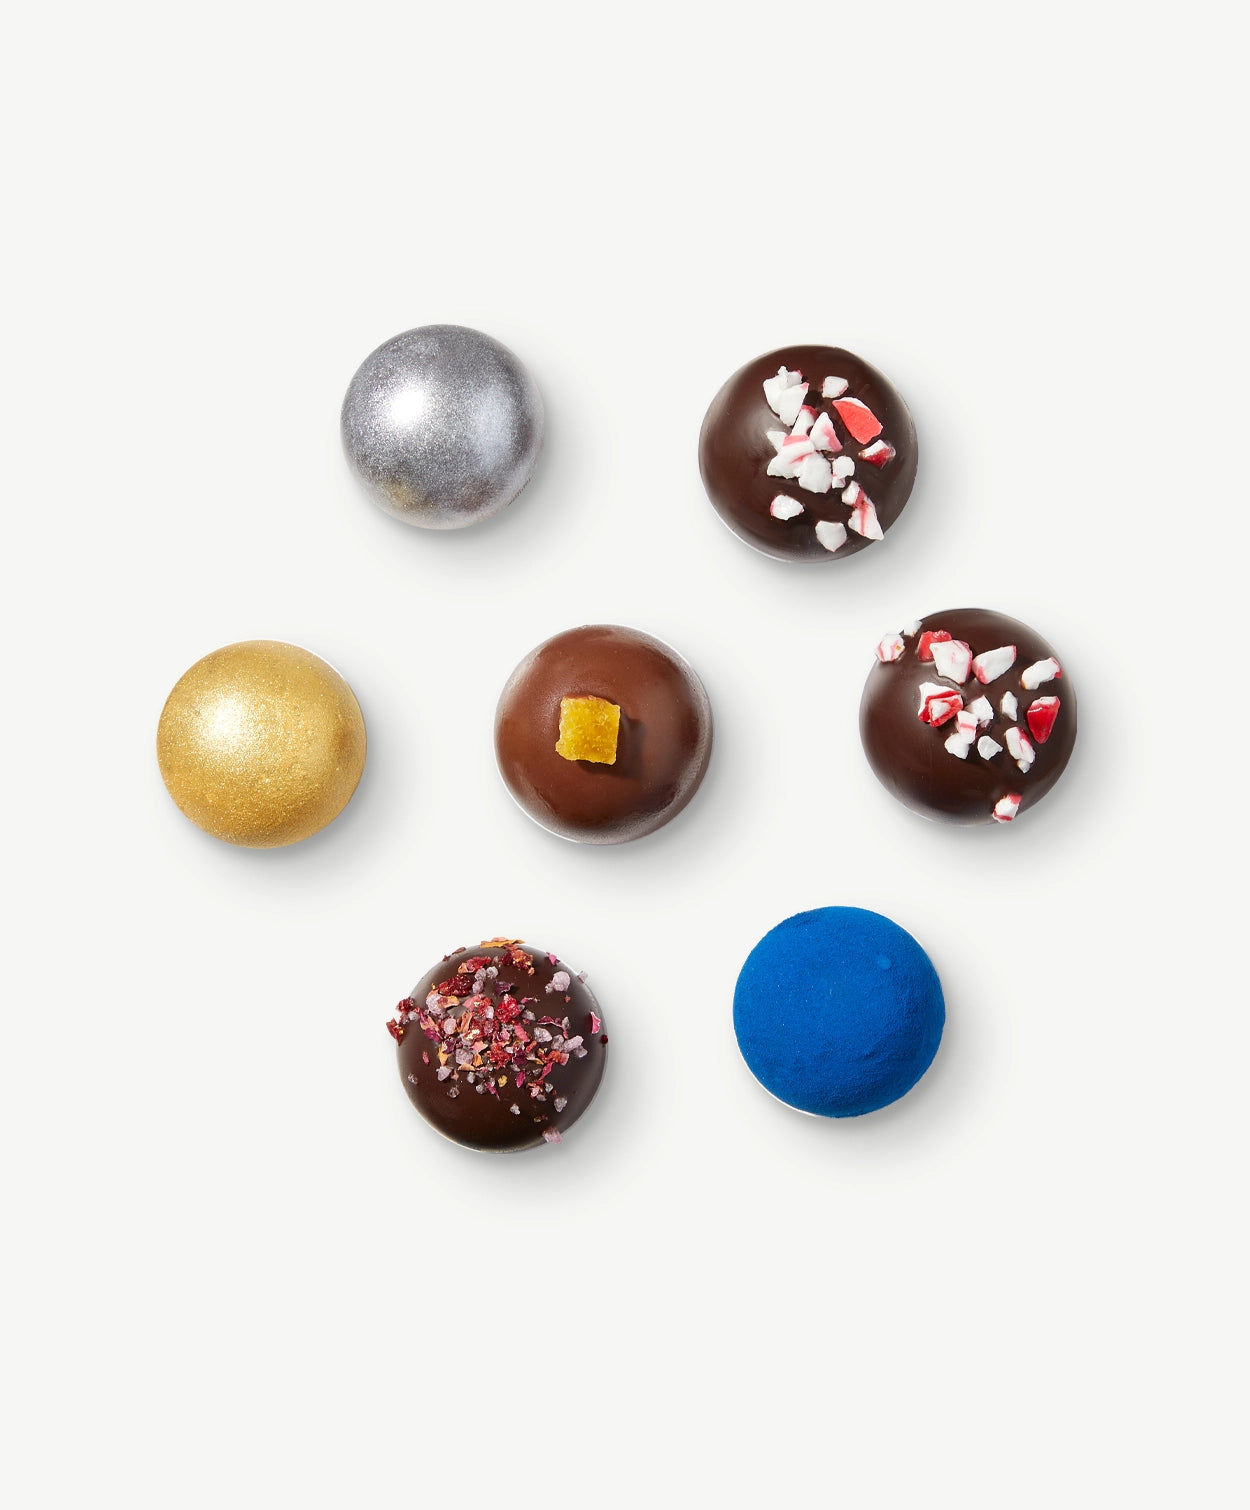 Seven Vosges truffles, decorated with metallic powders, chopped candy cane and bright blue ingredients sit in a hexagon on a light grey background.